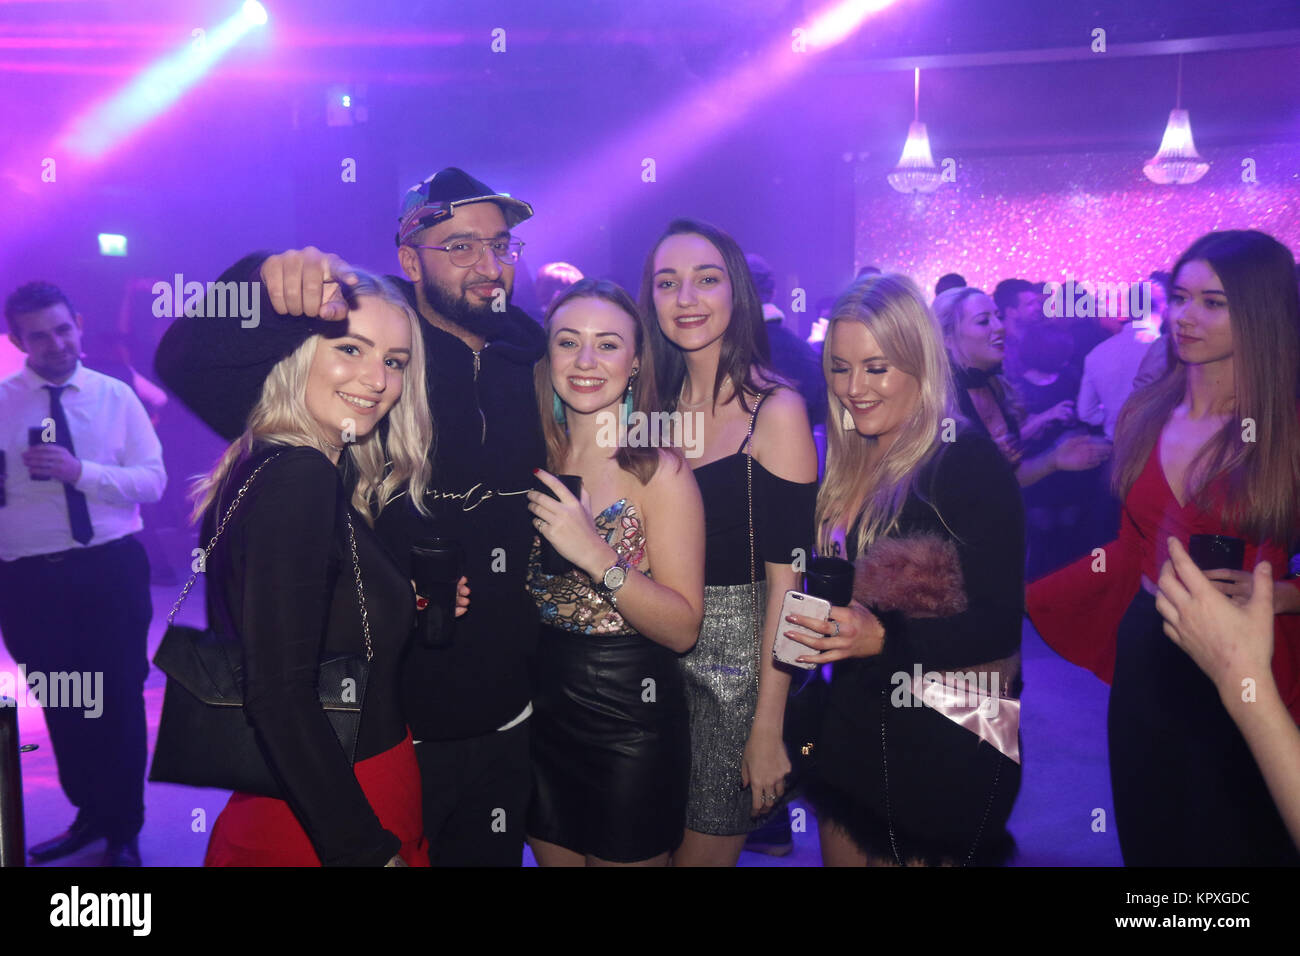 London, UK. 16th December, 2017. X Factor winner and Rak-Su star Mustafa Rahimtulla returns to his former workplace Hydeout 2.0 for night out with friends enjoying some weekend downtime after X Factor whirlwind. Mus previously worked at the club as a promoter. He posed for pictures with groups of fans before being escorted to the toilet by a doorman. Mustafa partied with his friends and former colleagues. Earlier in the day he ate out at Watford's Wagamamas alongside bandmates Myles Stephenson and Jamal Shurland. Credit: Ayeesha Walsh/Alamy Live News Stock Photo